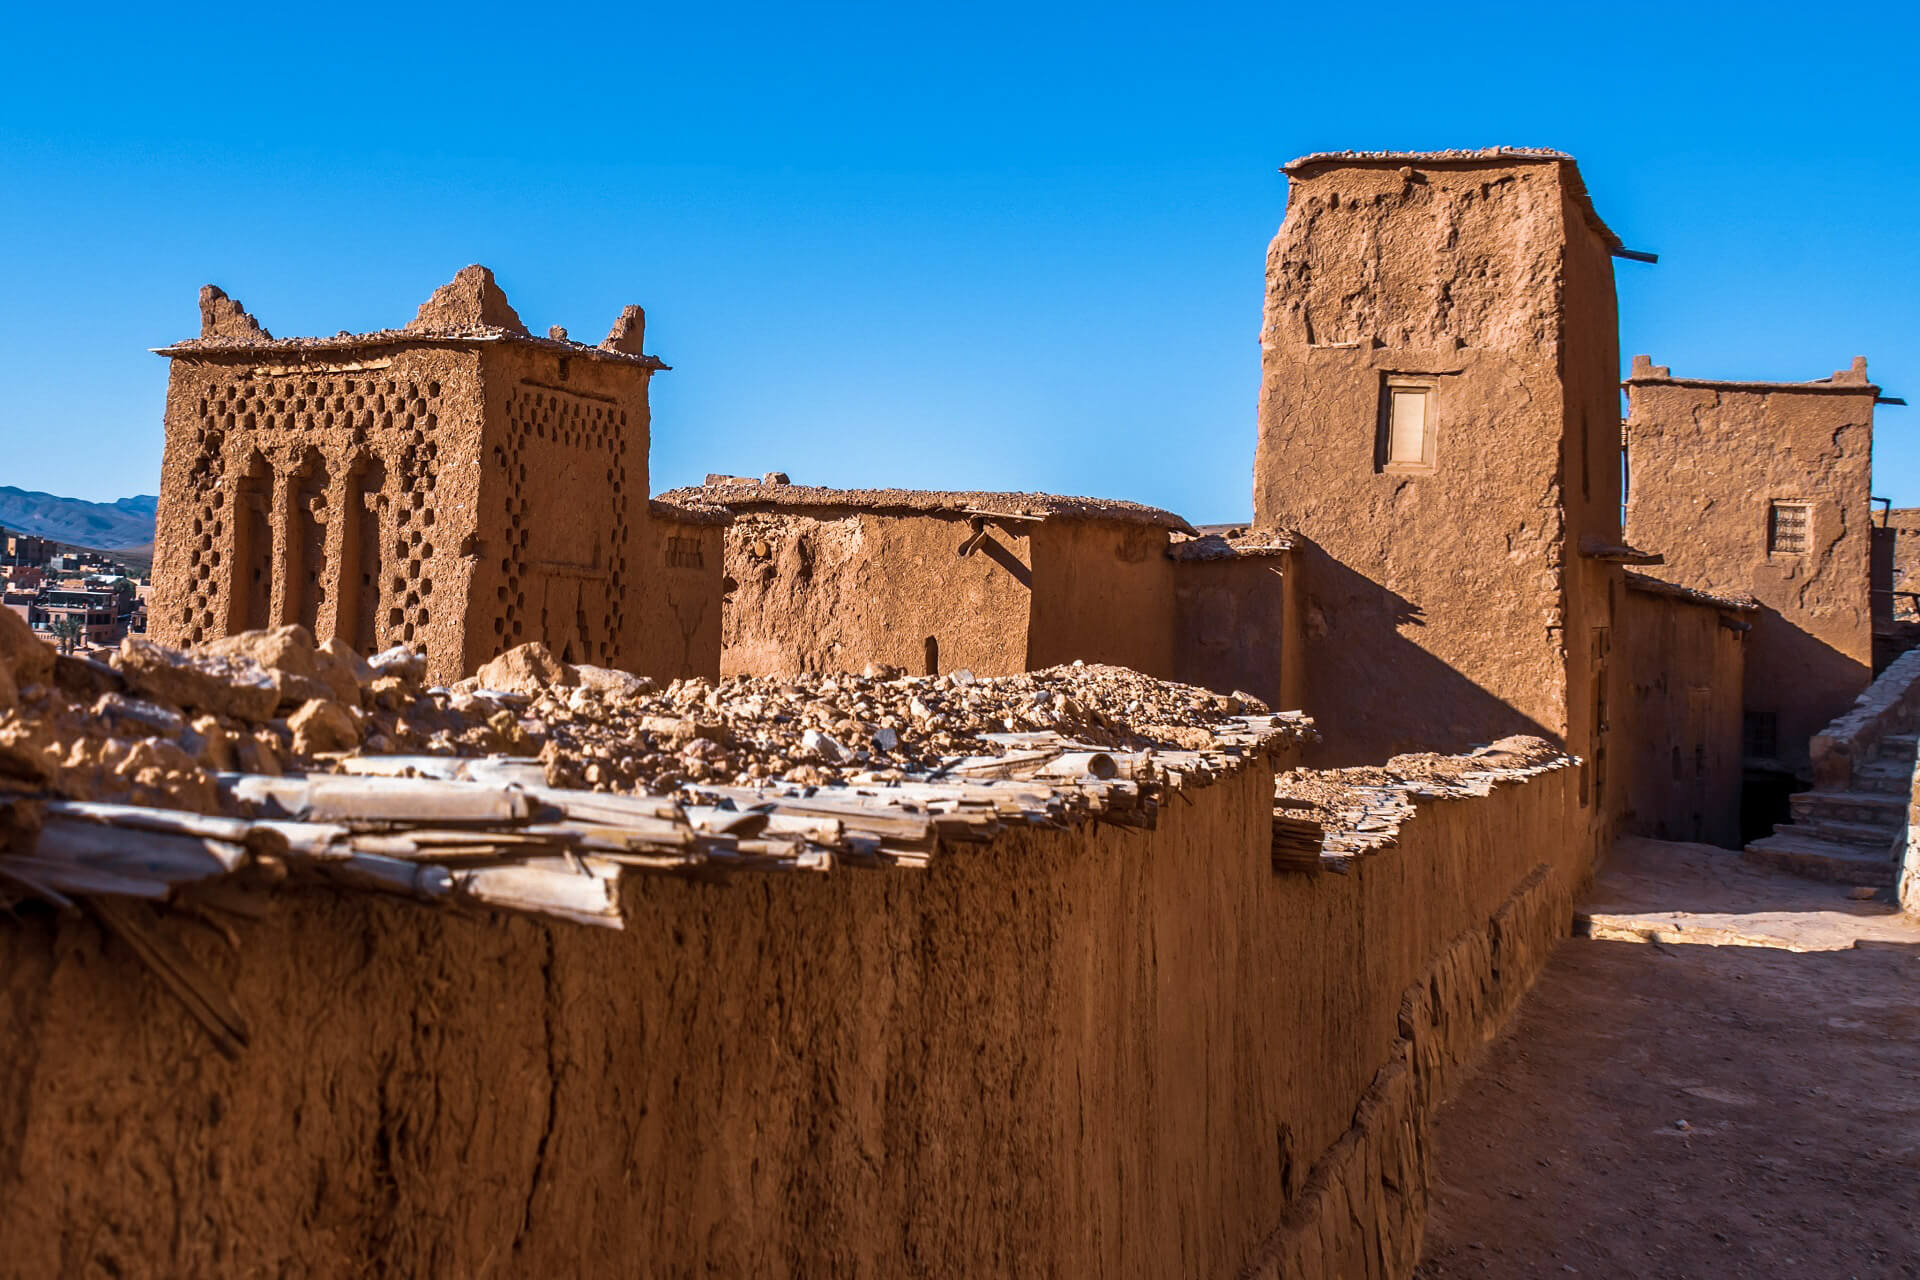 AIT BEN HADDOU - The City Of Of Mud And Straw